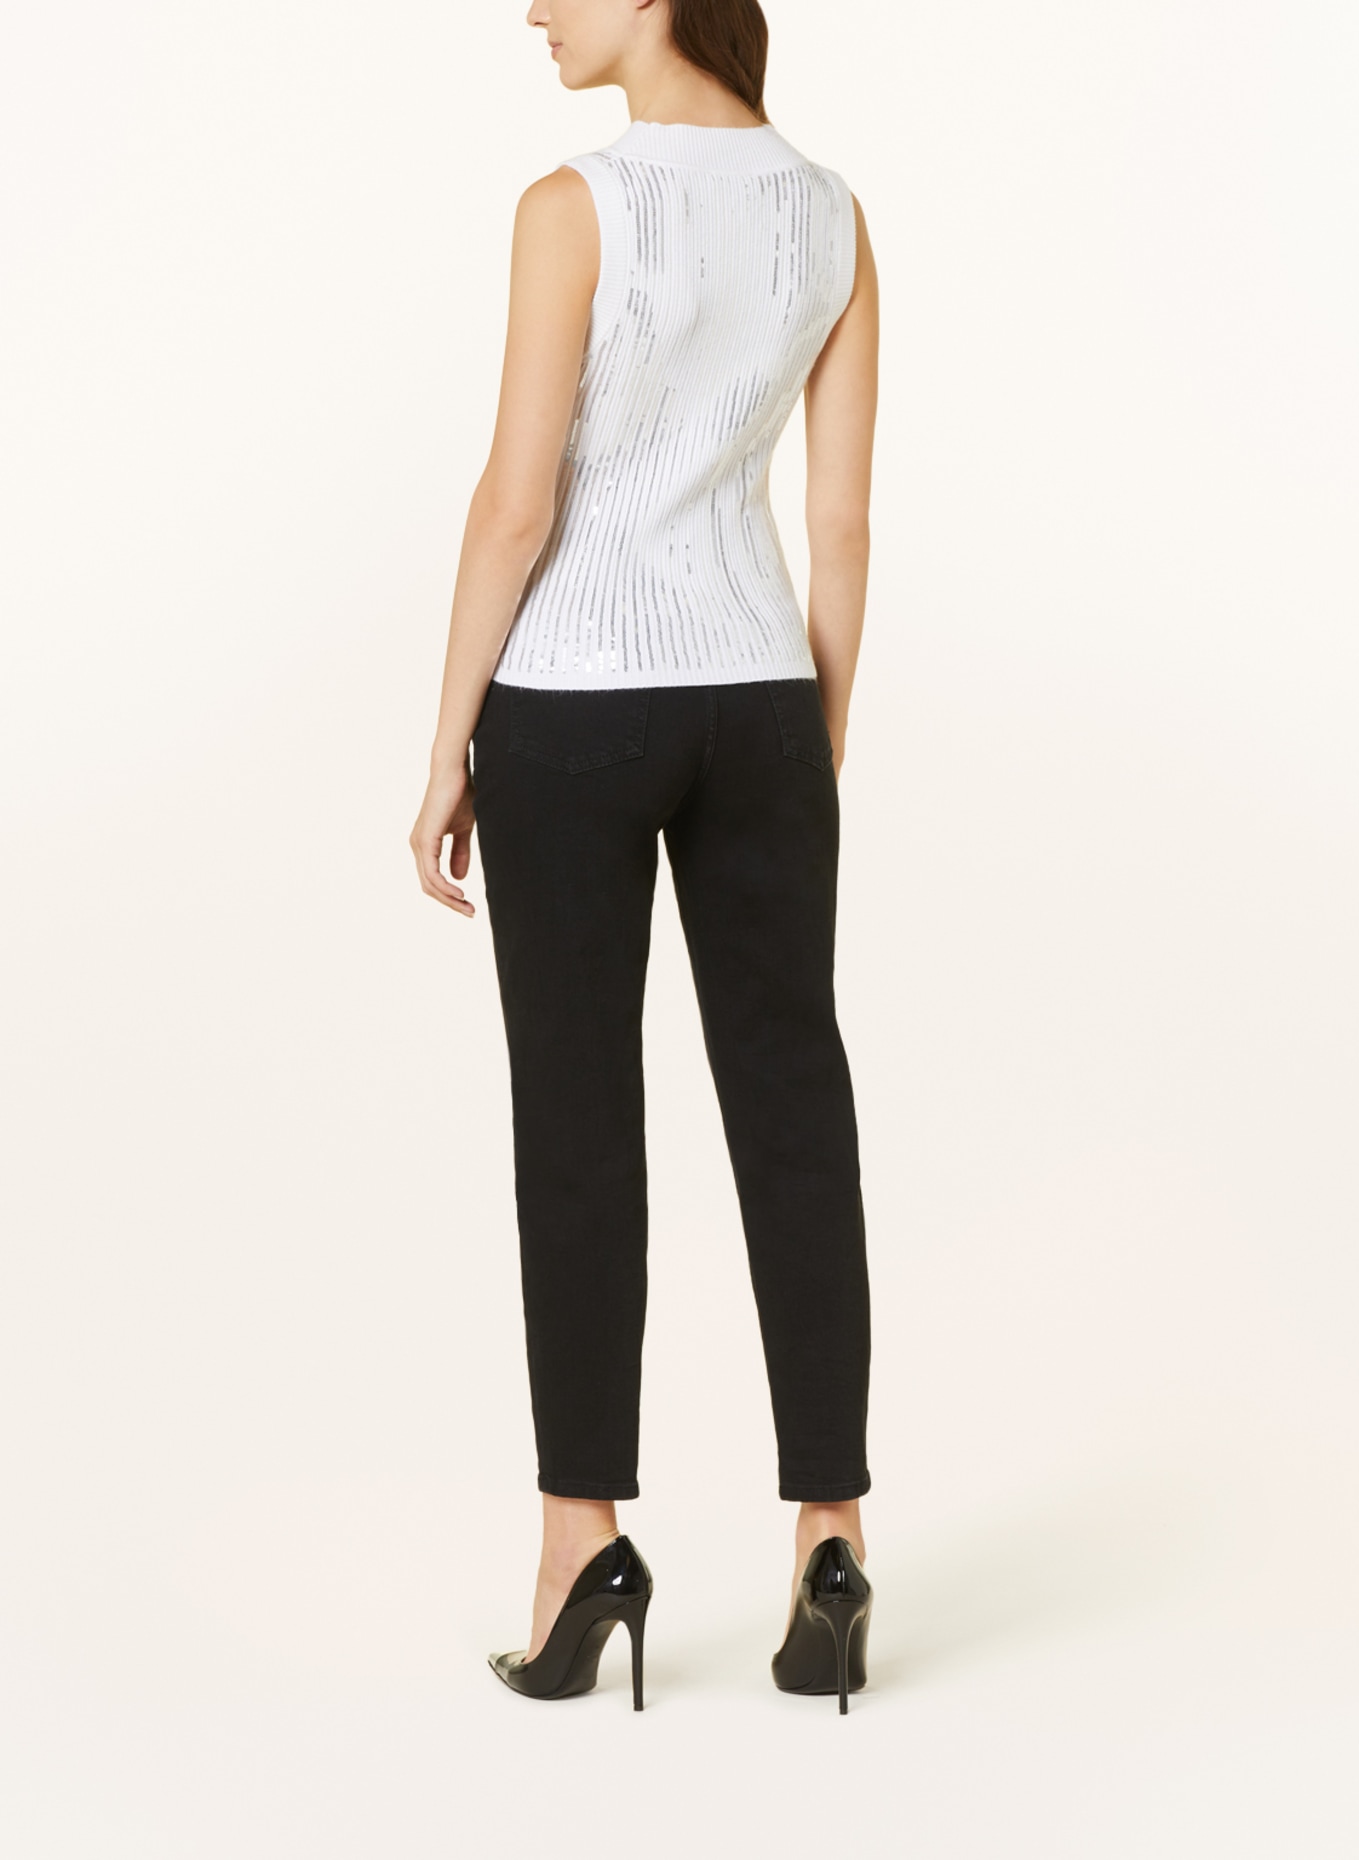 GUESS Knit top VIVIAN with sequins, Color: CREAM (Image 3)